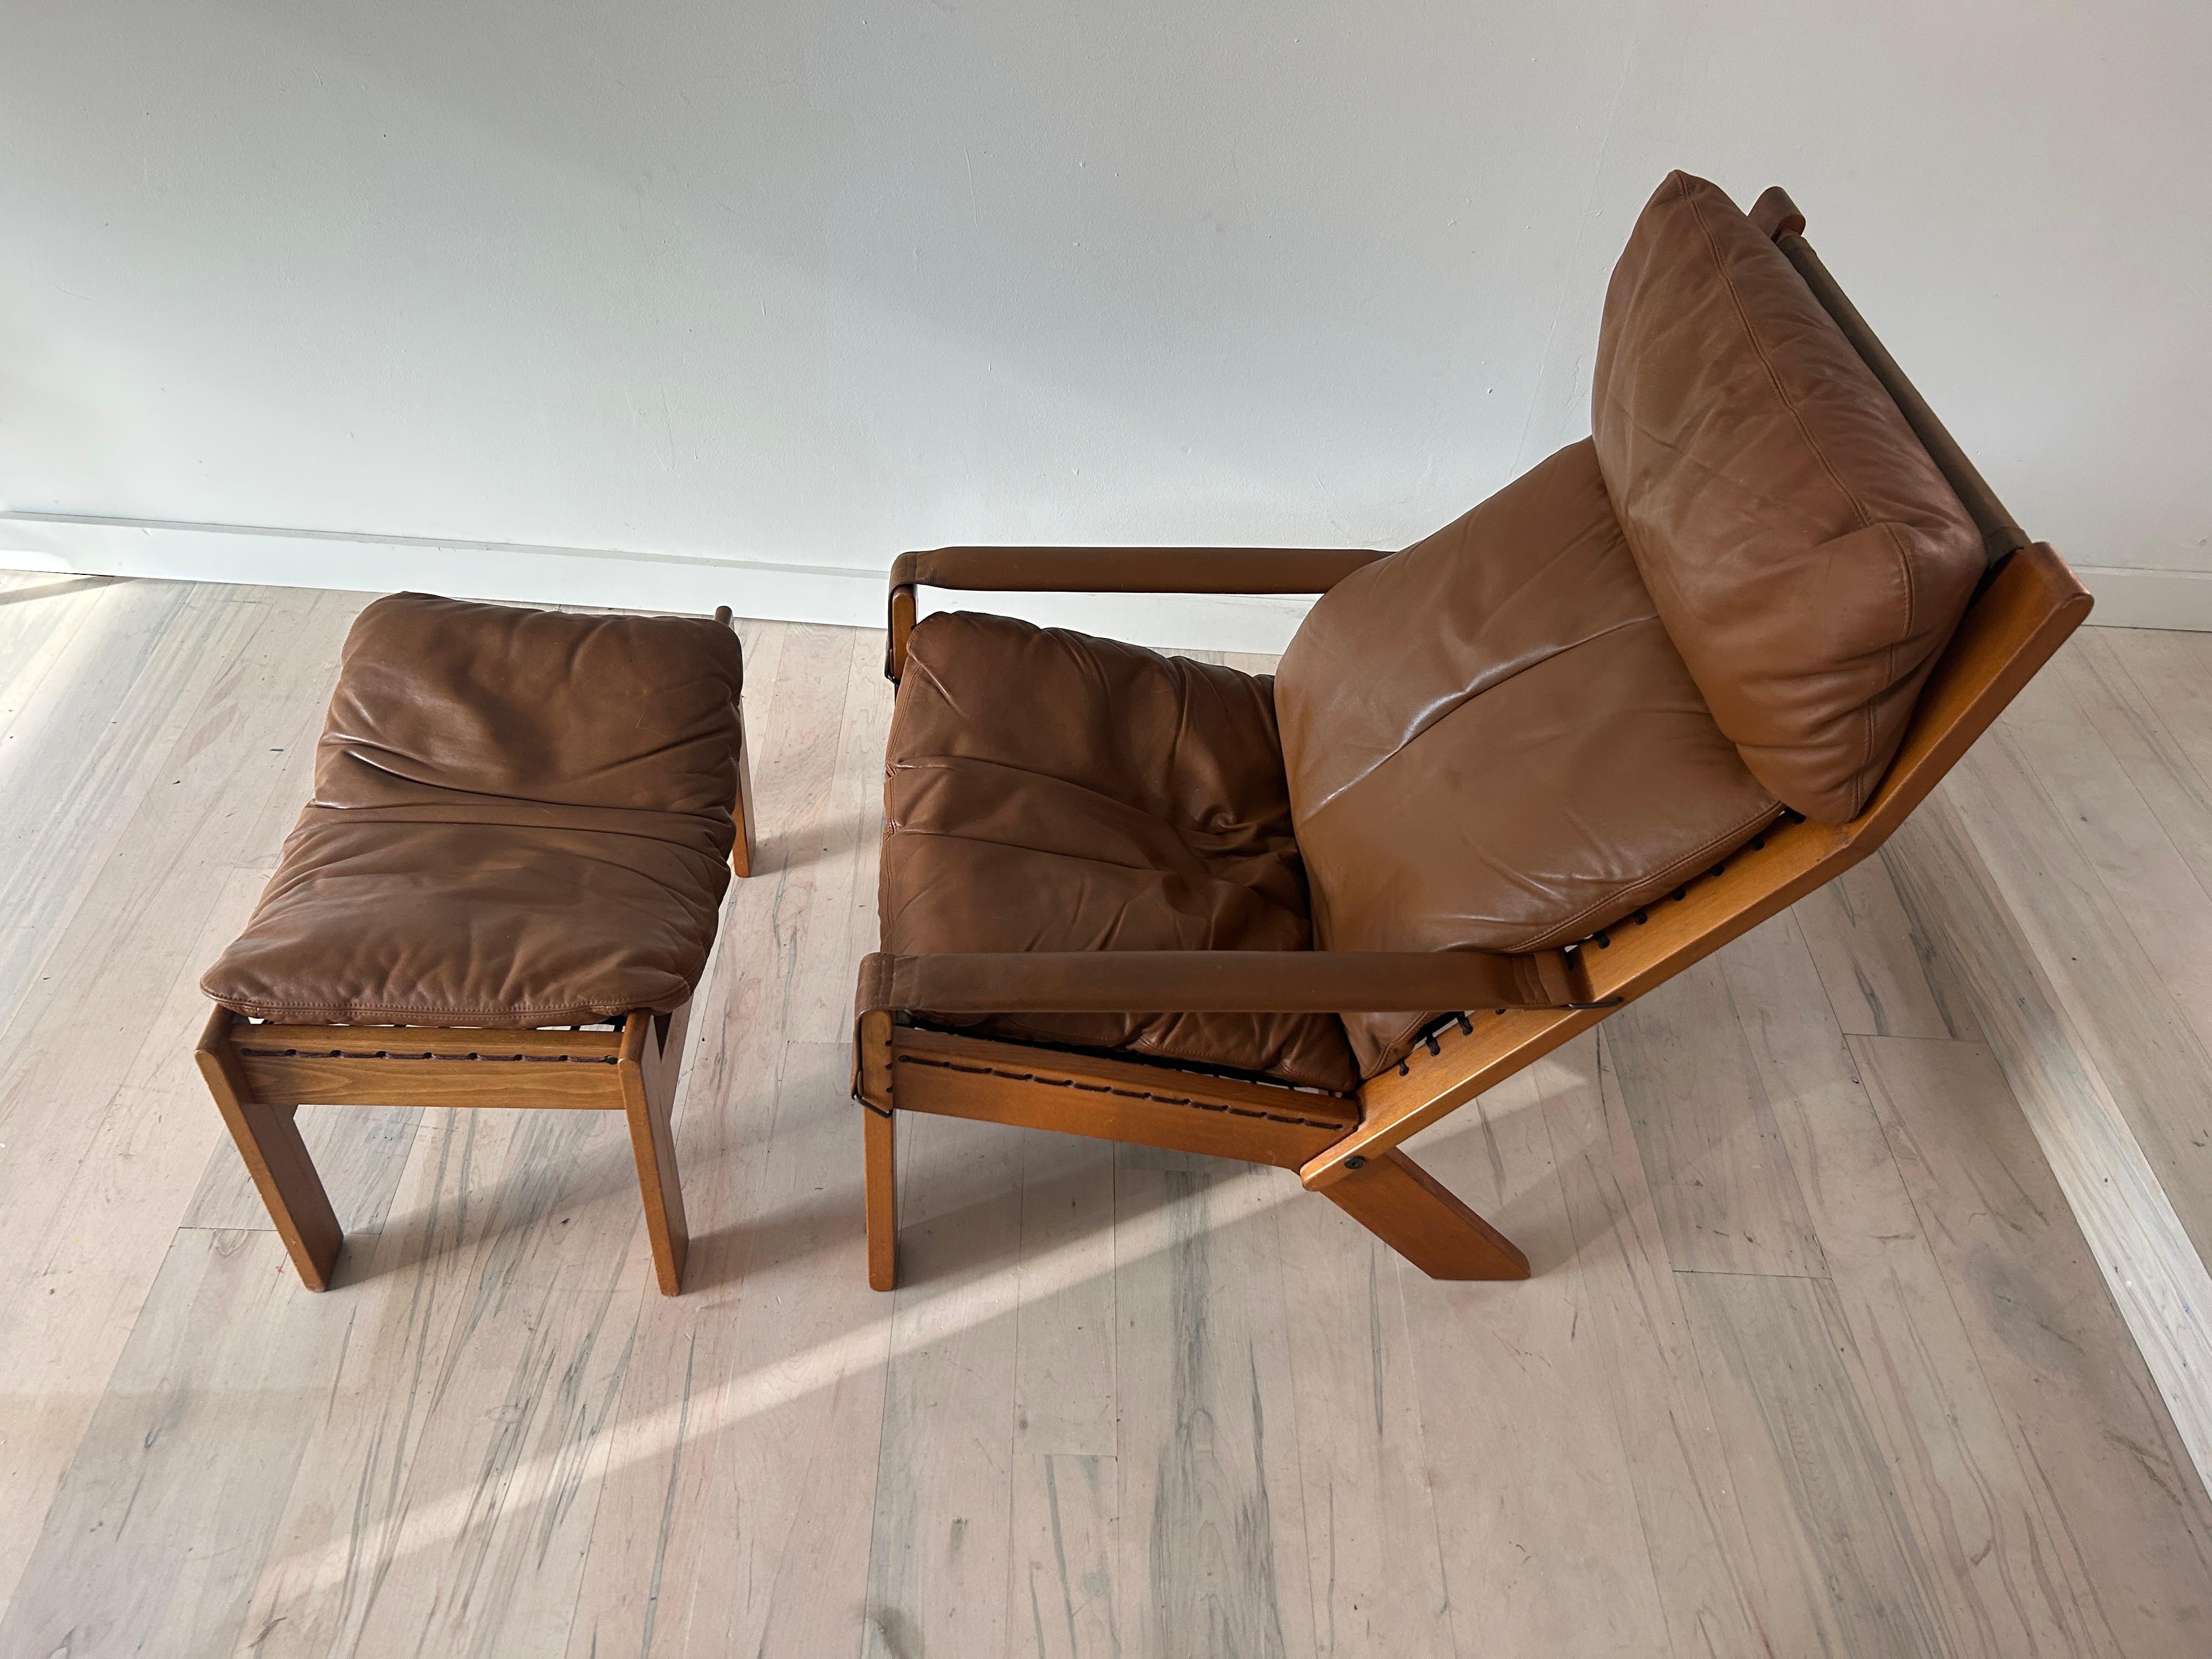 Midcentury Scandinavian Modern leather lounge chair and ottoman by Westnofa.

Westnofa Norwegian modern chair and ottoman. Wooden frame, removable leather chair and ottoman cushions, safari leather sling arms allowing for adjustable reclining.